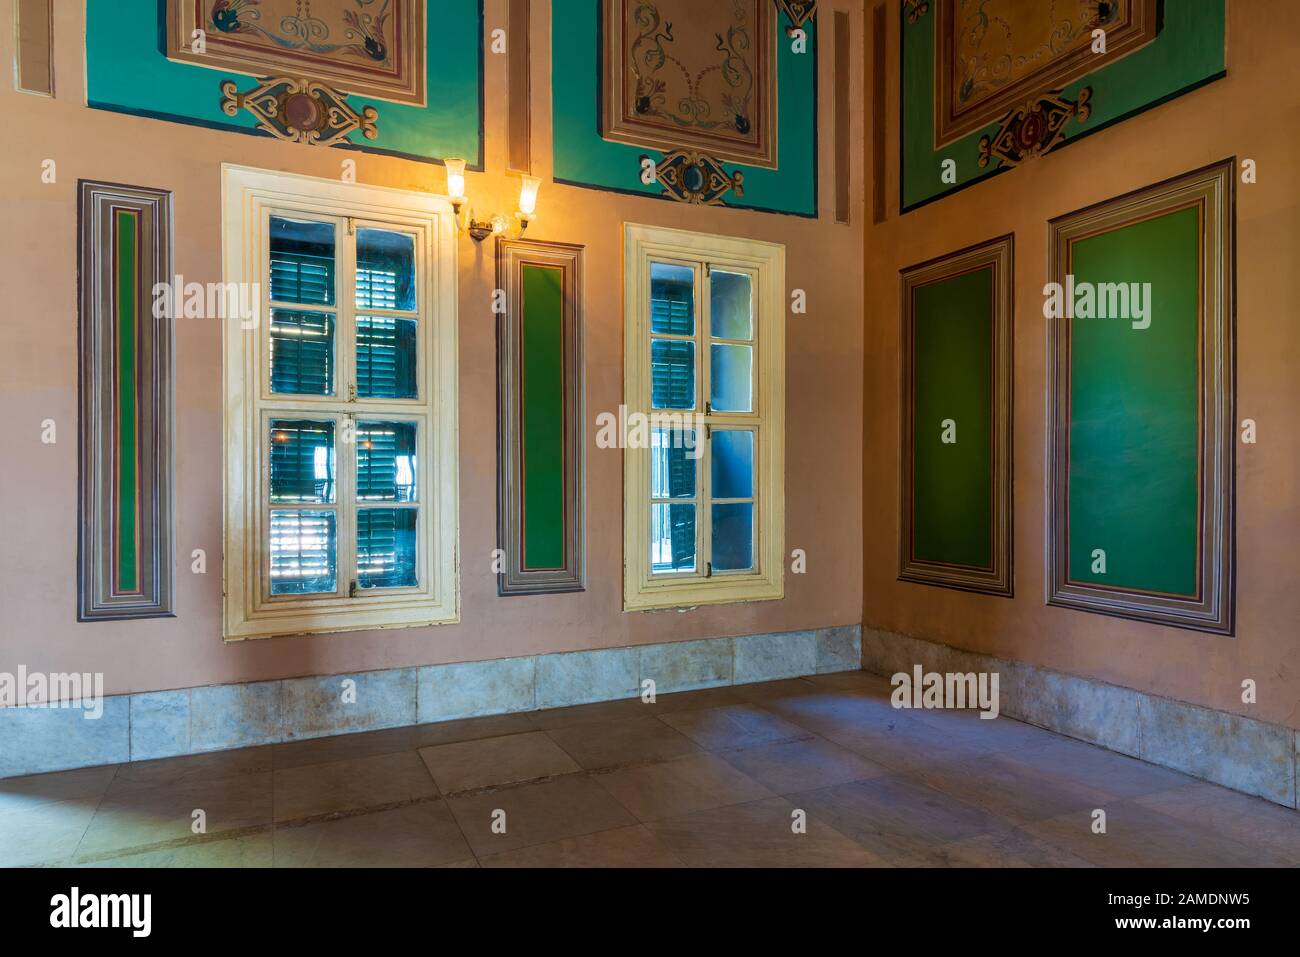 Corner orange wall with two wooden windows with green shutters, beautiful elegant rectangular green frames with ornate border, and white tiled marble floor Stock Photo